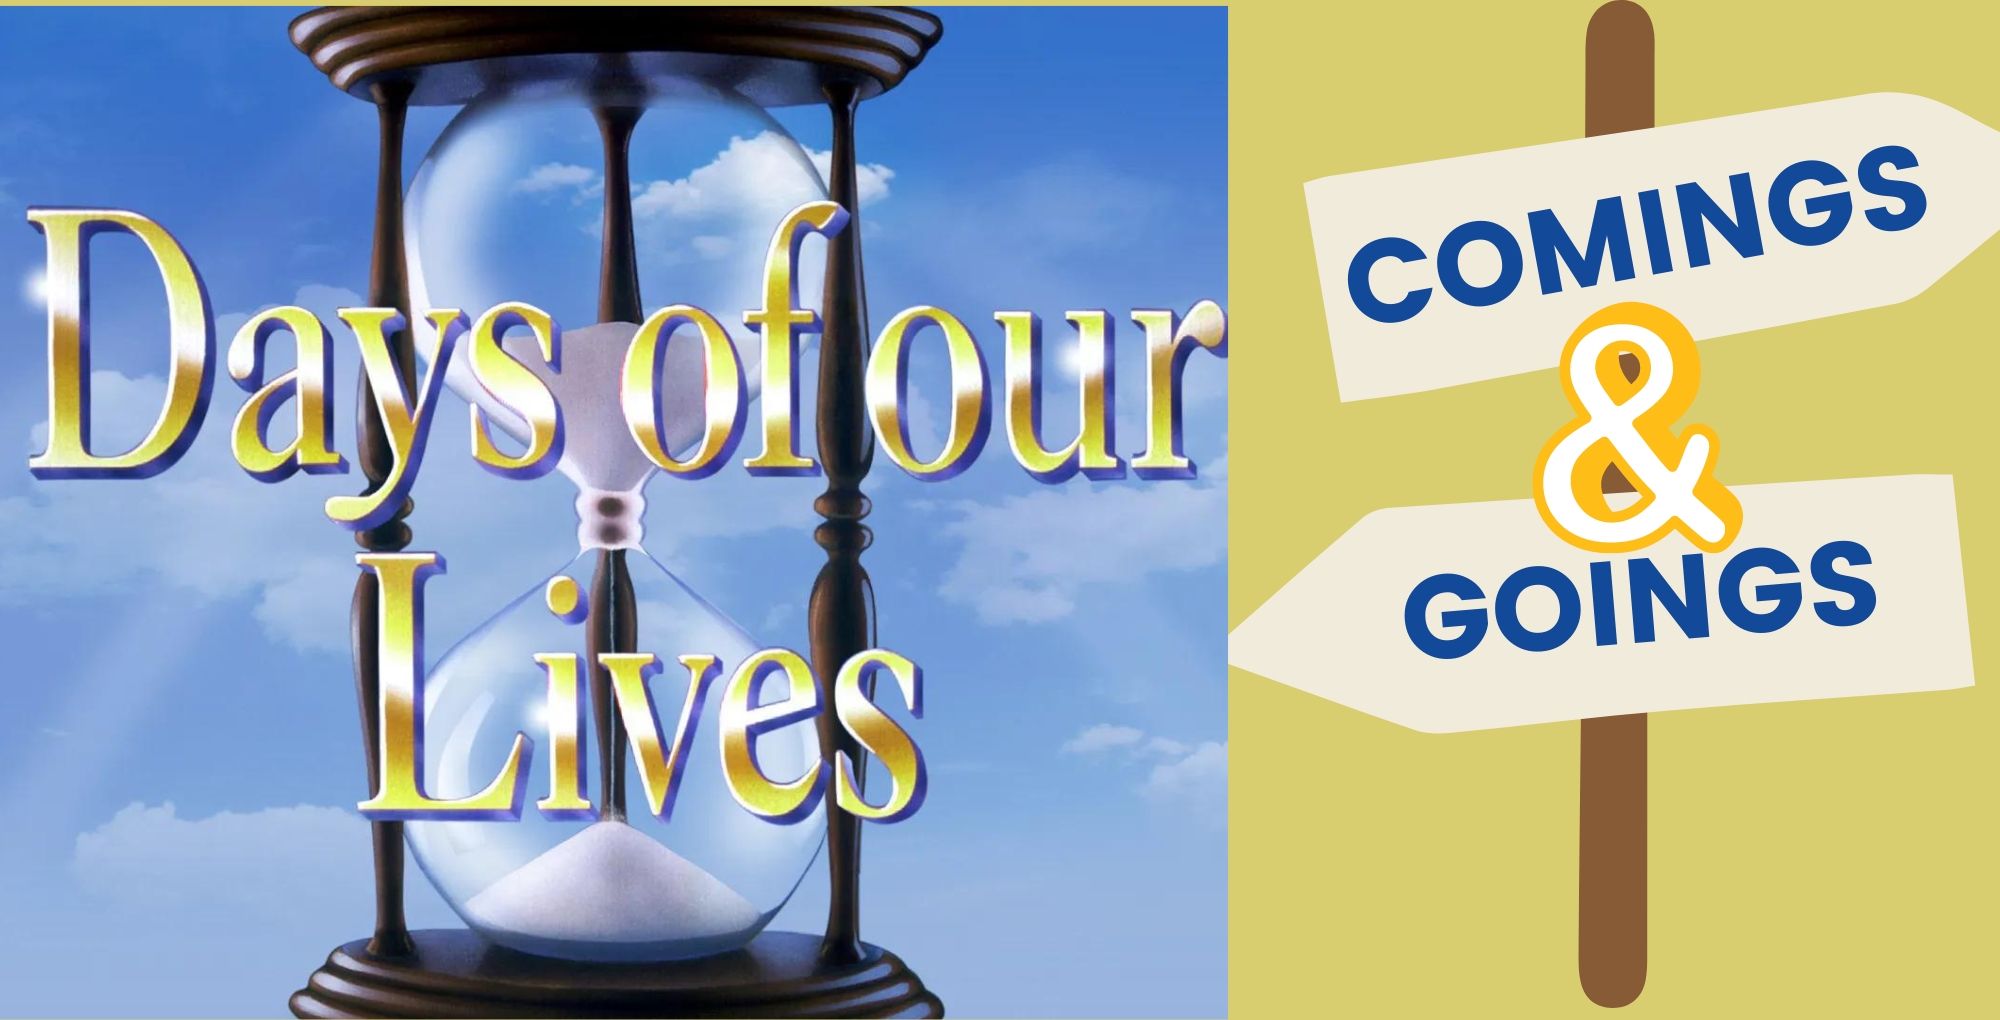 days of our lives comings and goings for february 26 - march 1.